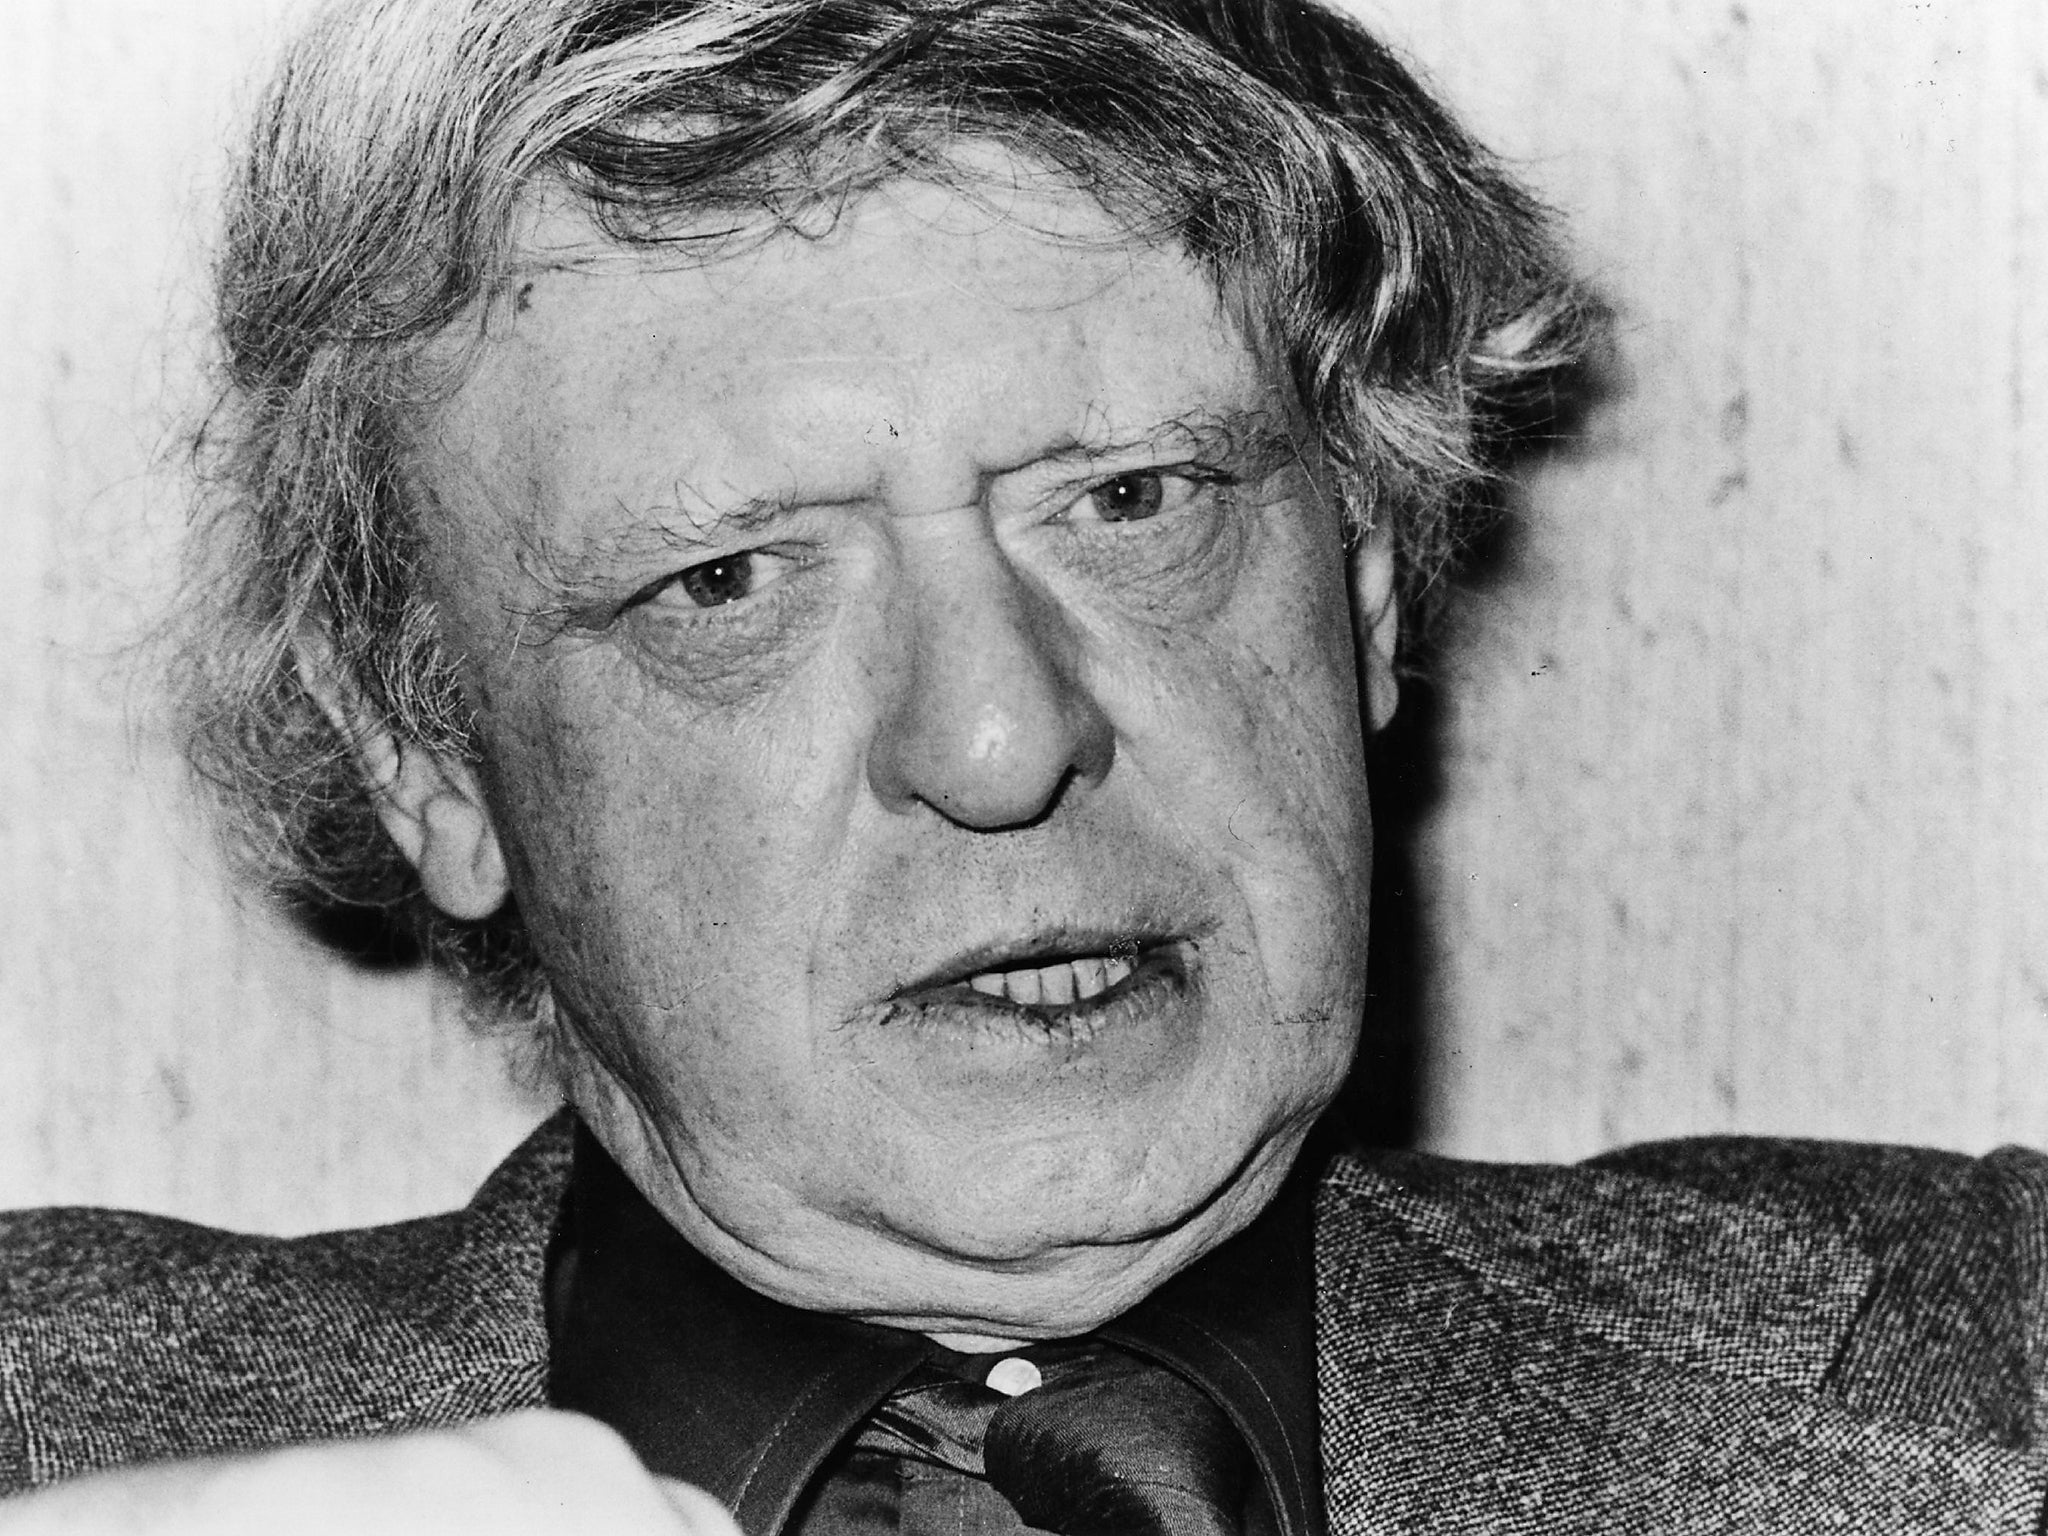 Anthony Burgess wrote more than 30 novels and 25 non-fiction books in his lifetime, but ‘A Clockwork Orange’ has had the most lasting impact?(Getty)